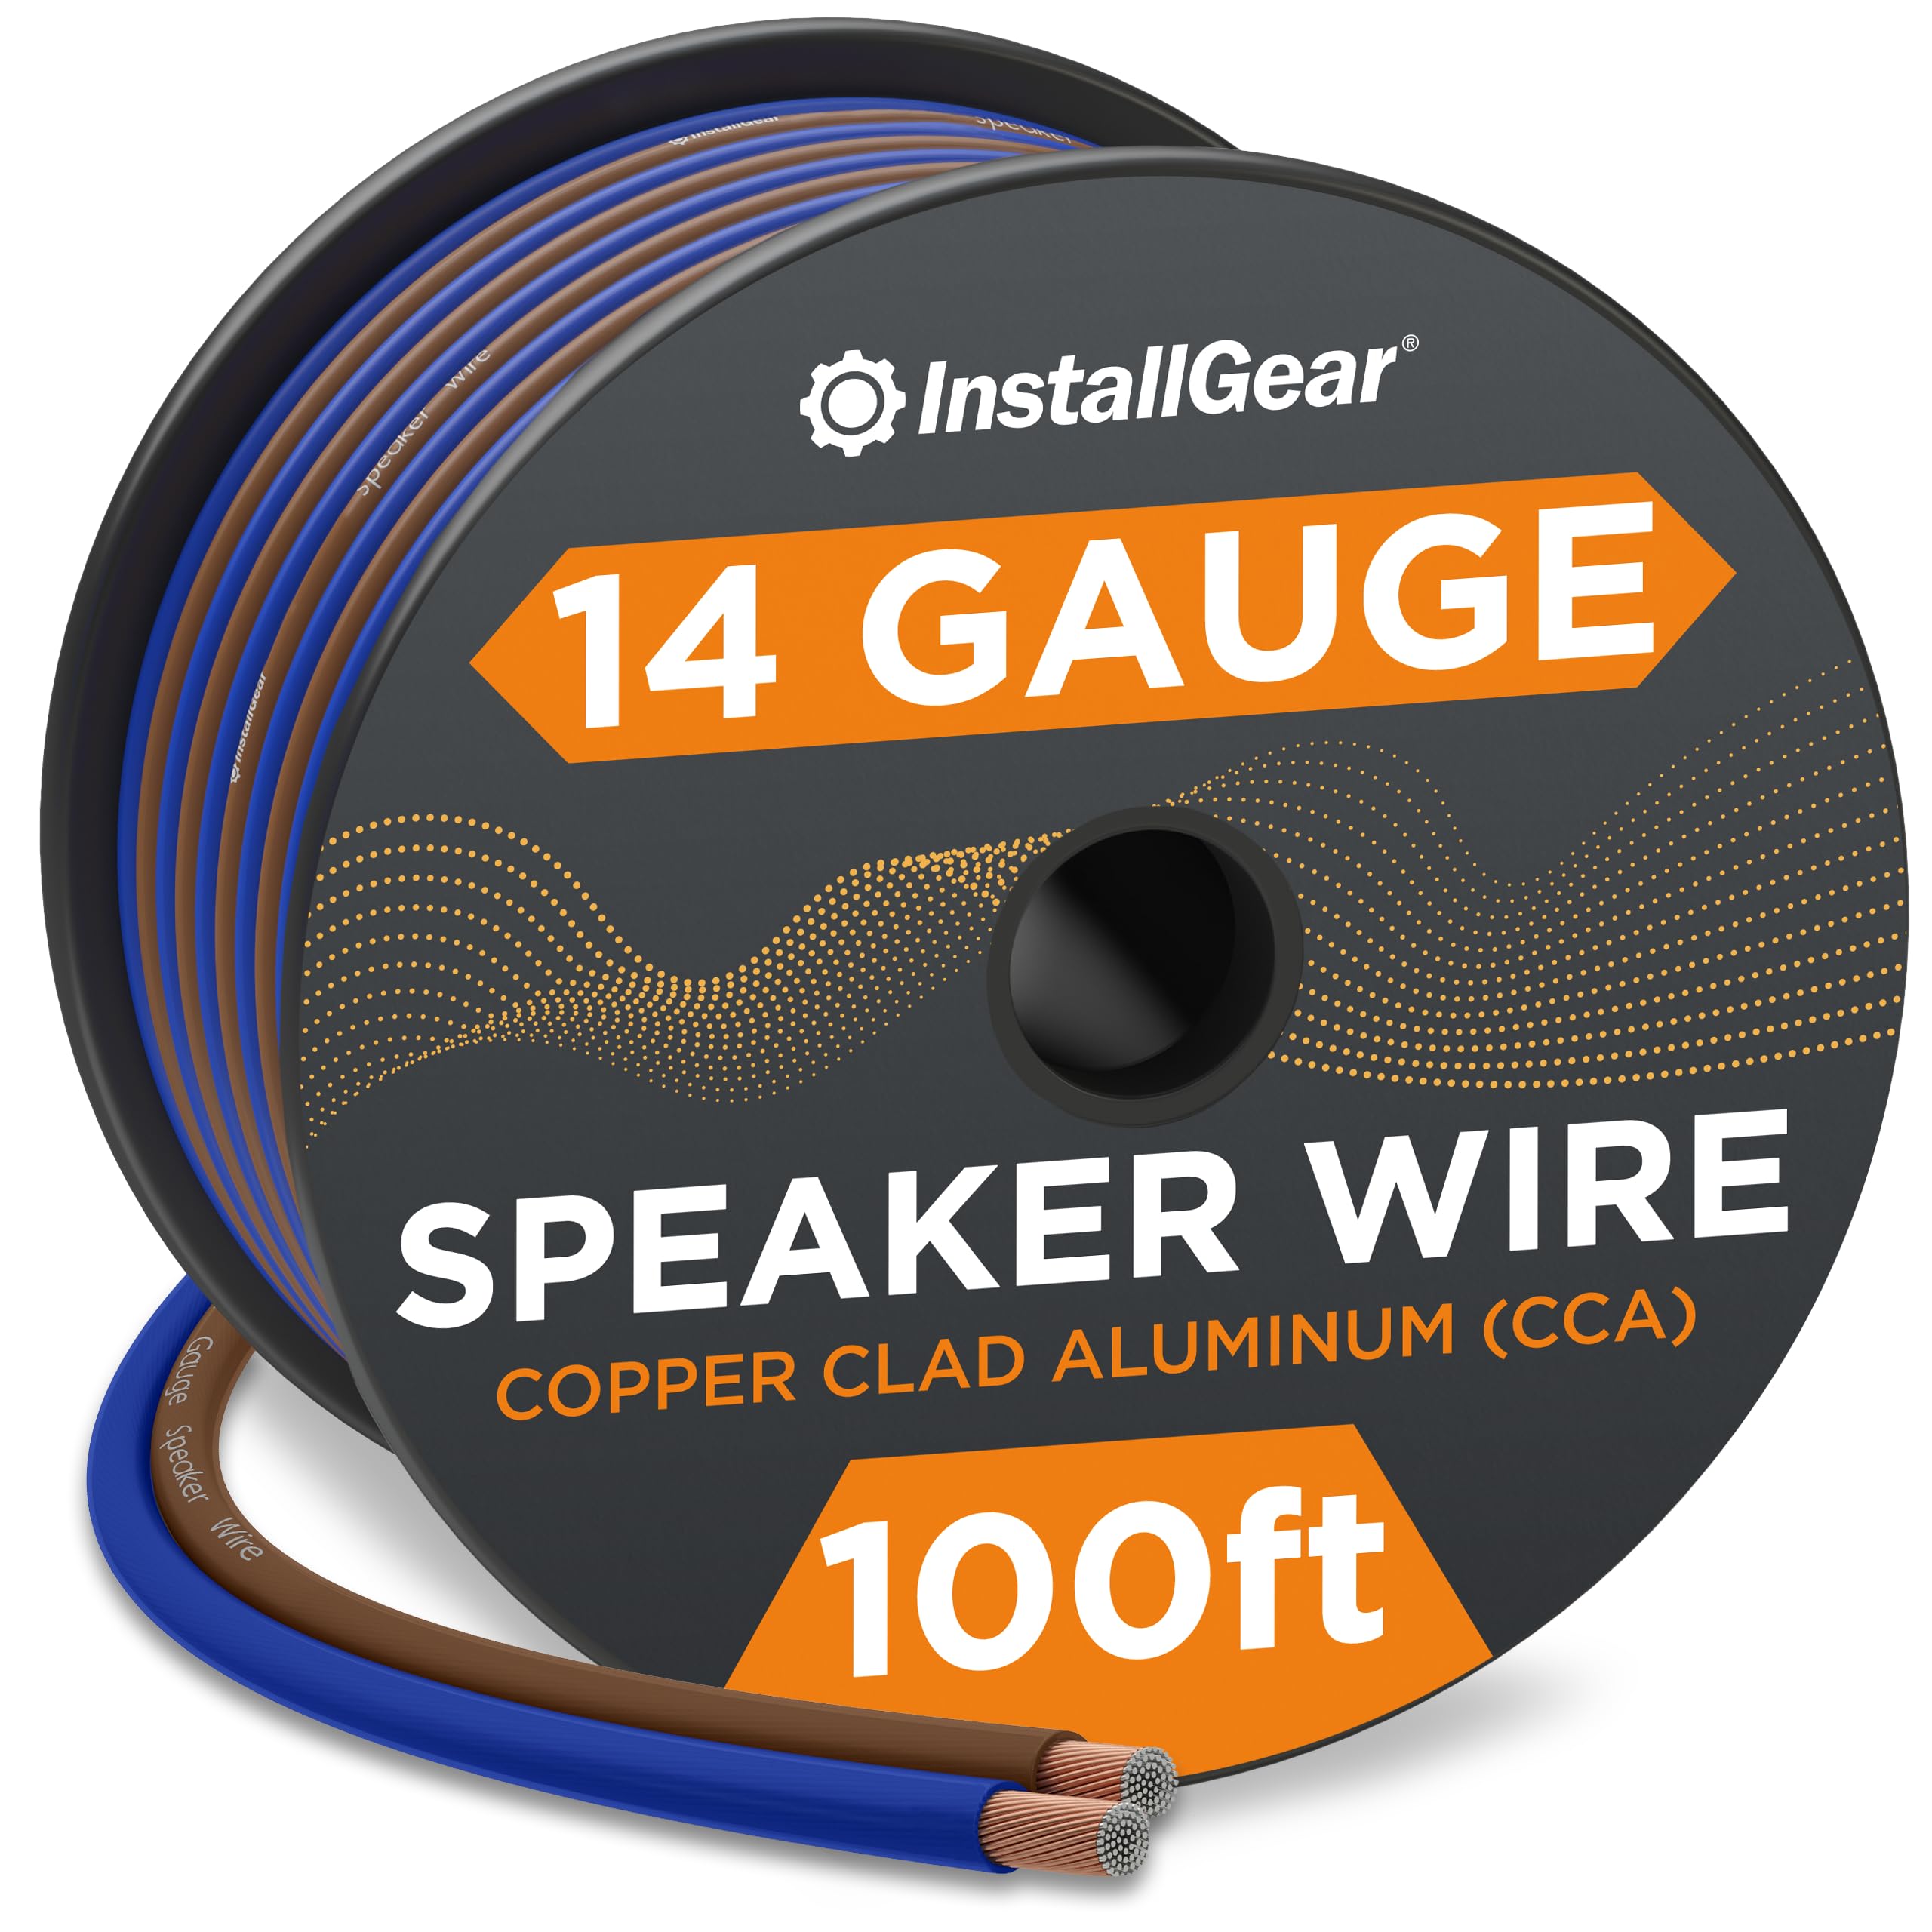 InstallGear 14 Gauge Speaker Wire Cable (100 Feet), 14 AWG Speaker Wire Cable, True Spec Soft Touch Cables | Great Use for Car Speakers Stereos, Home Theater Speakers, Surround Sound, Radio Wires